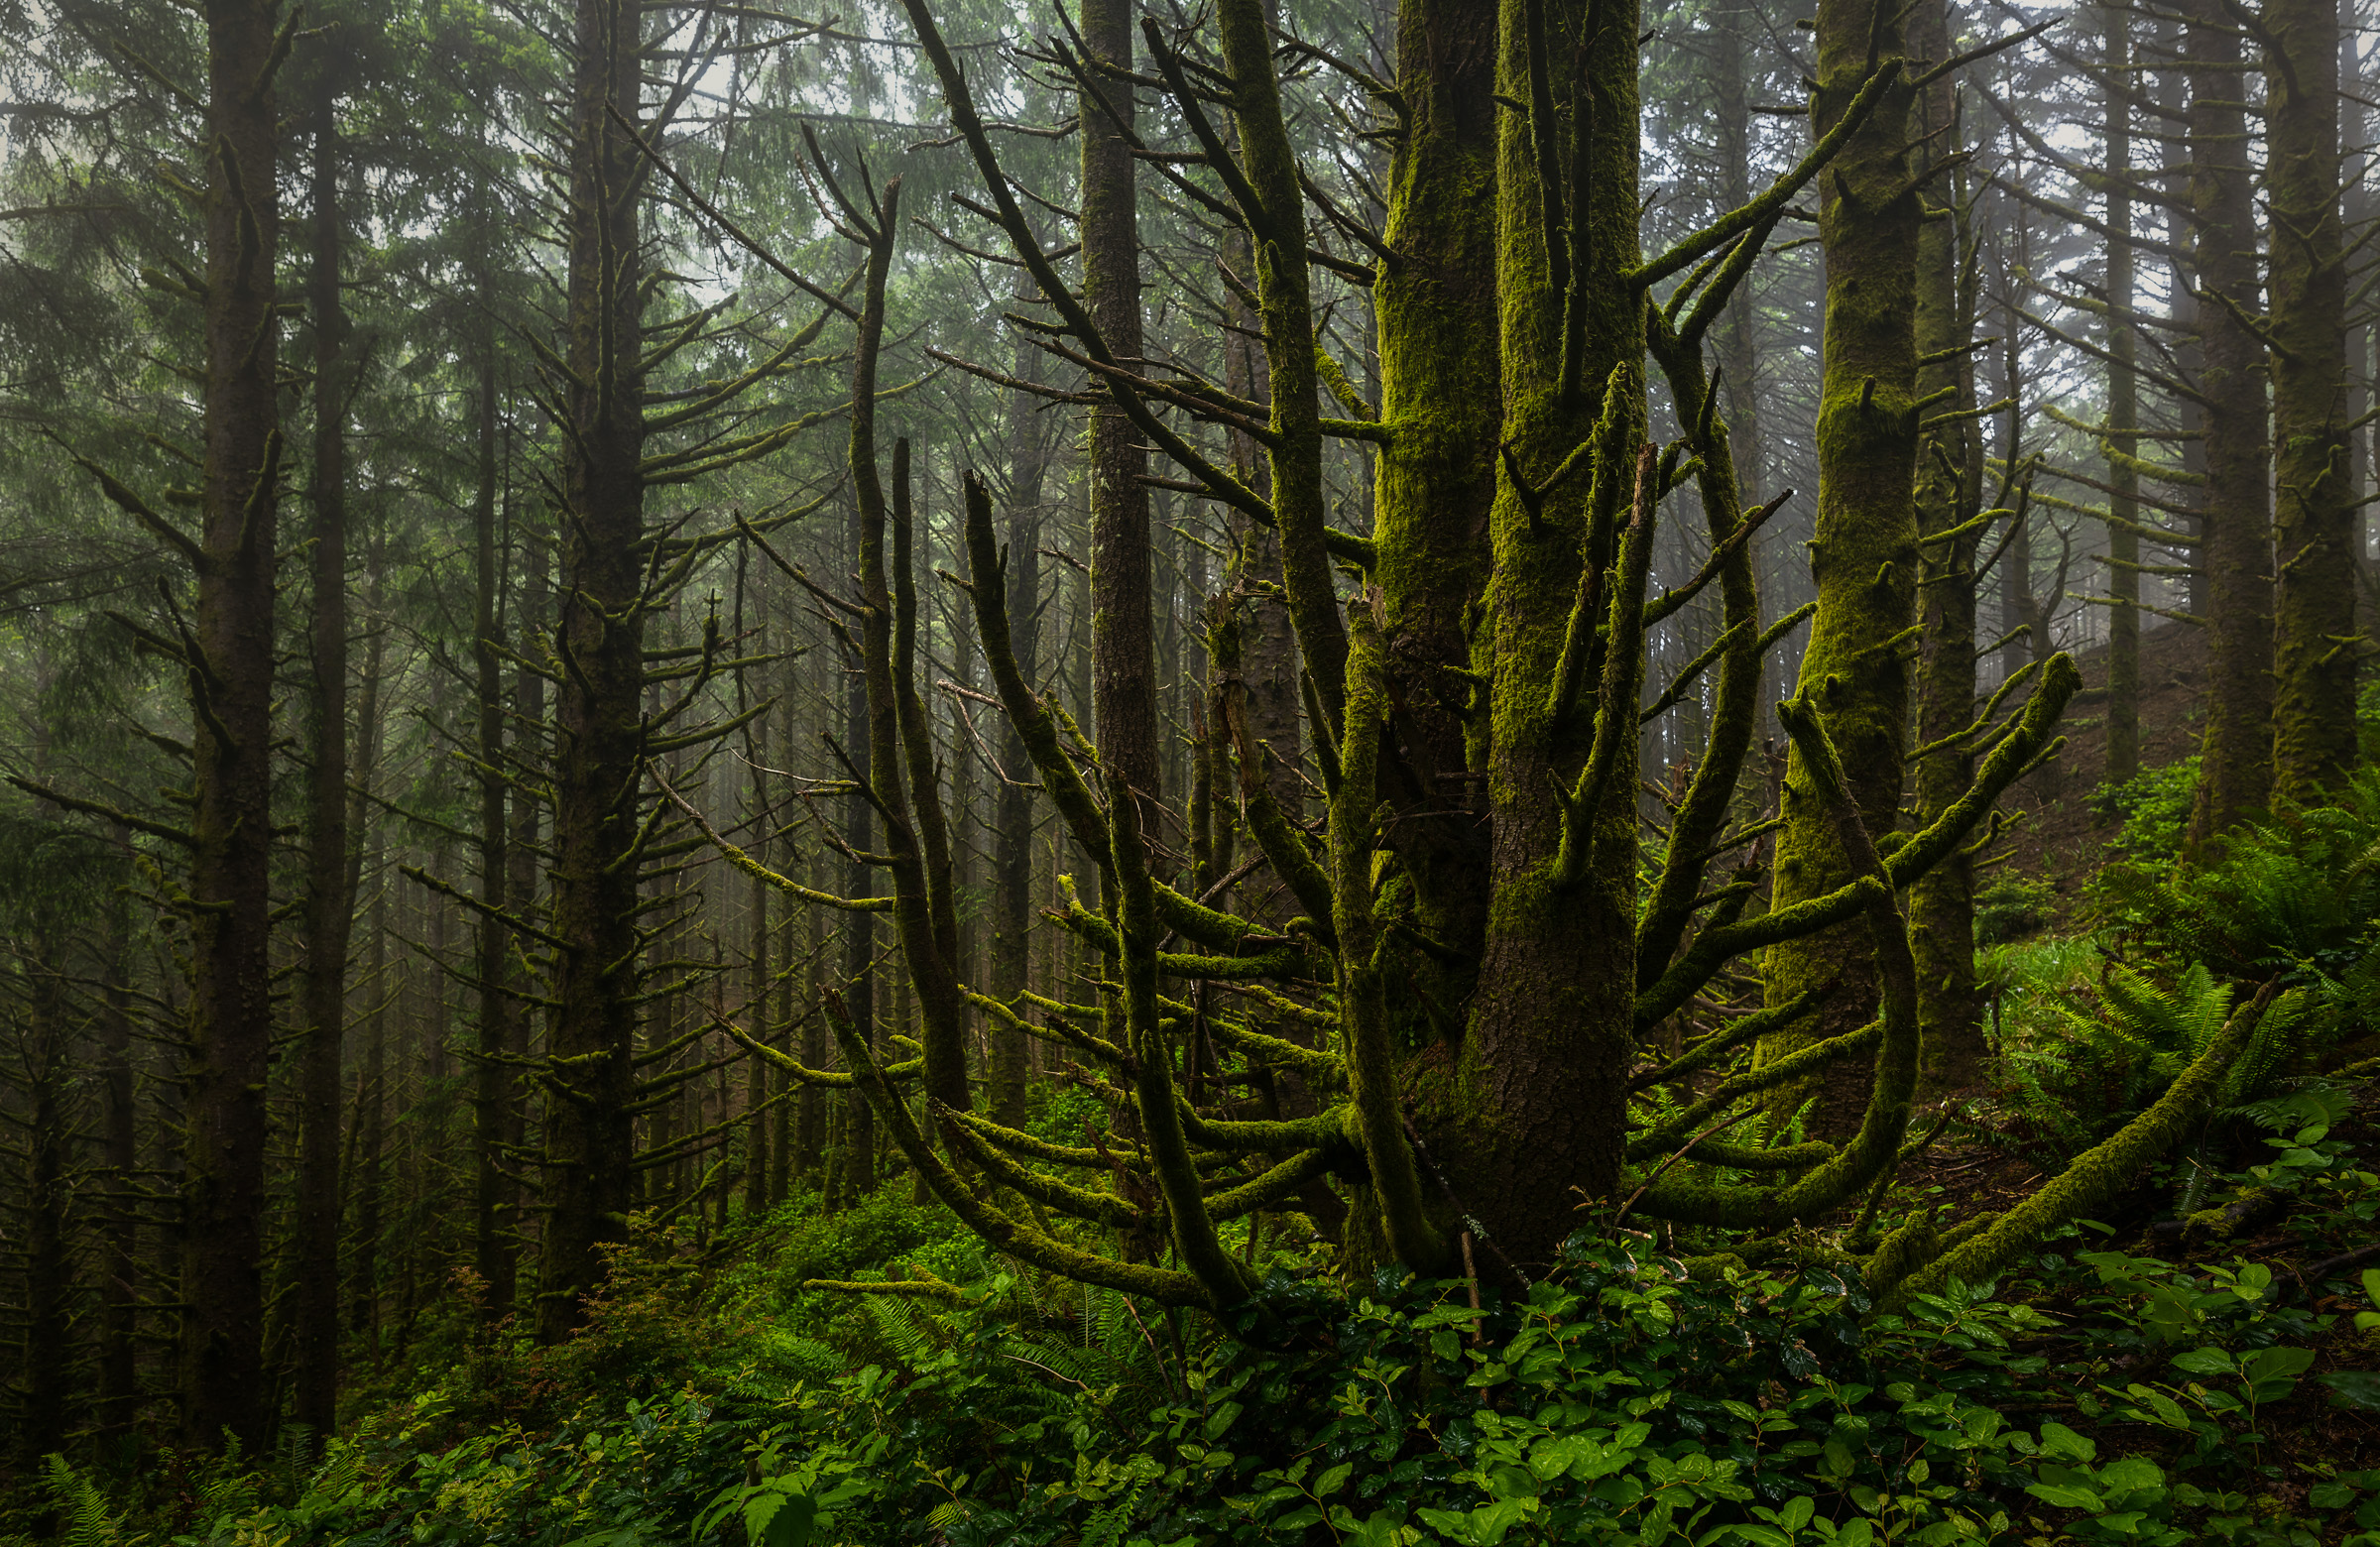 The "Spider Tree" stands as a living testament to the unique wonders of Oregon's rainforest. Its limbs stretch outward like the...